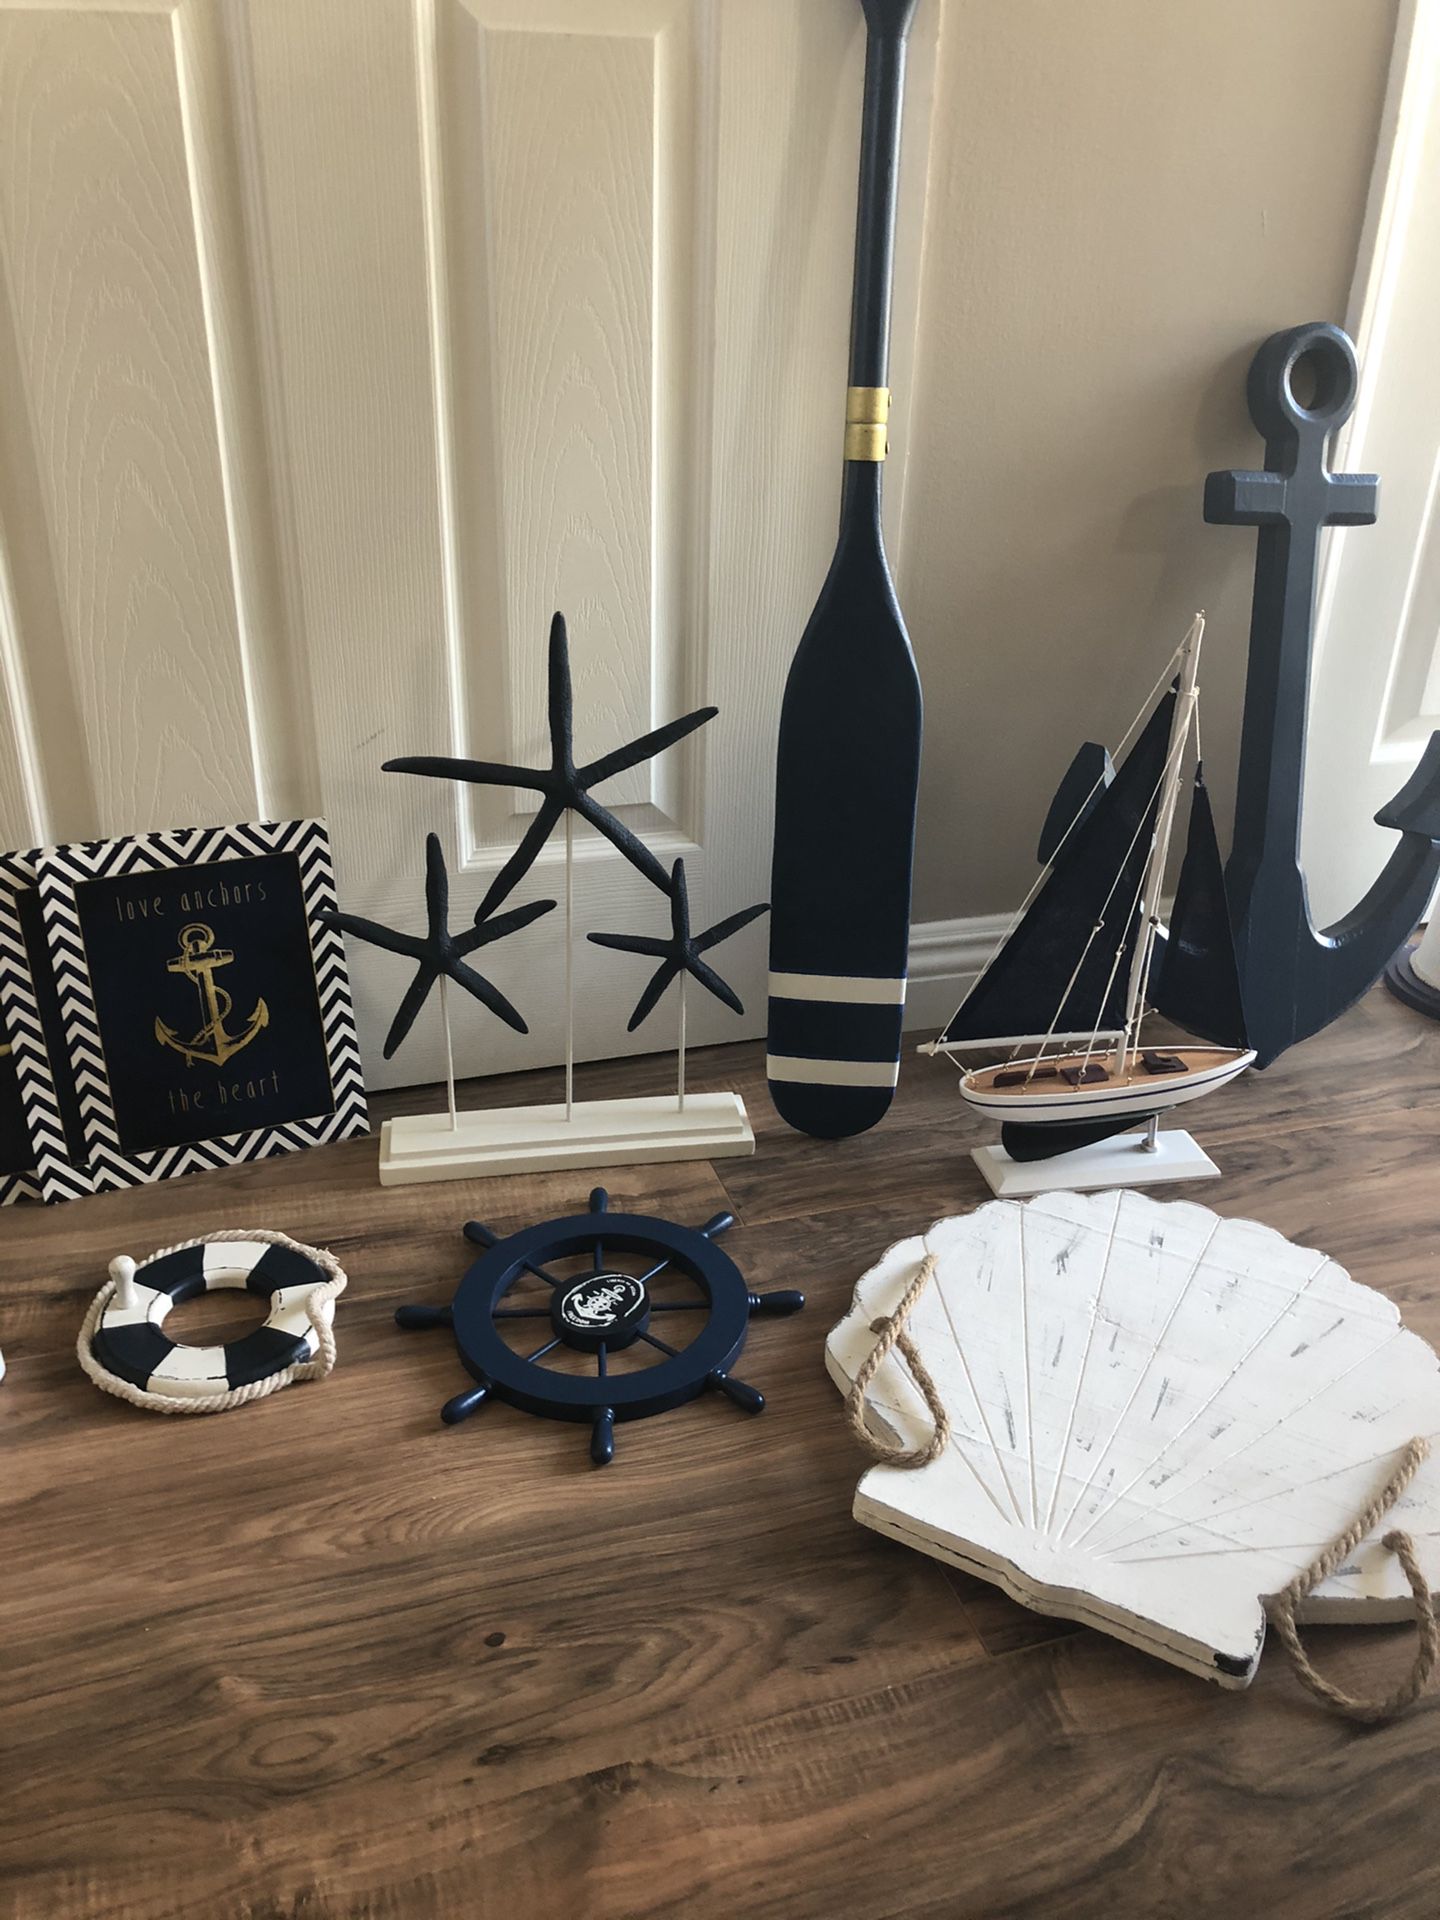 Nautical Home Decorations from Hobby Lobby